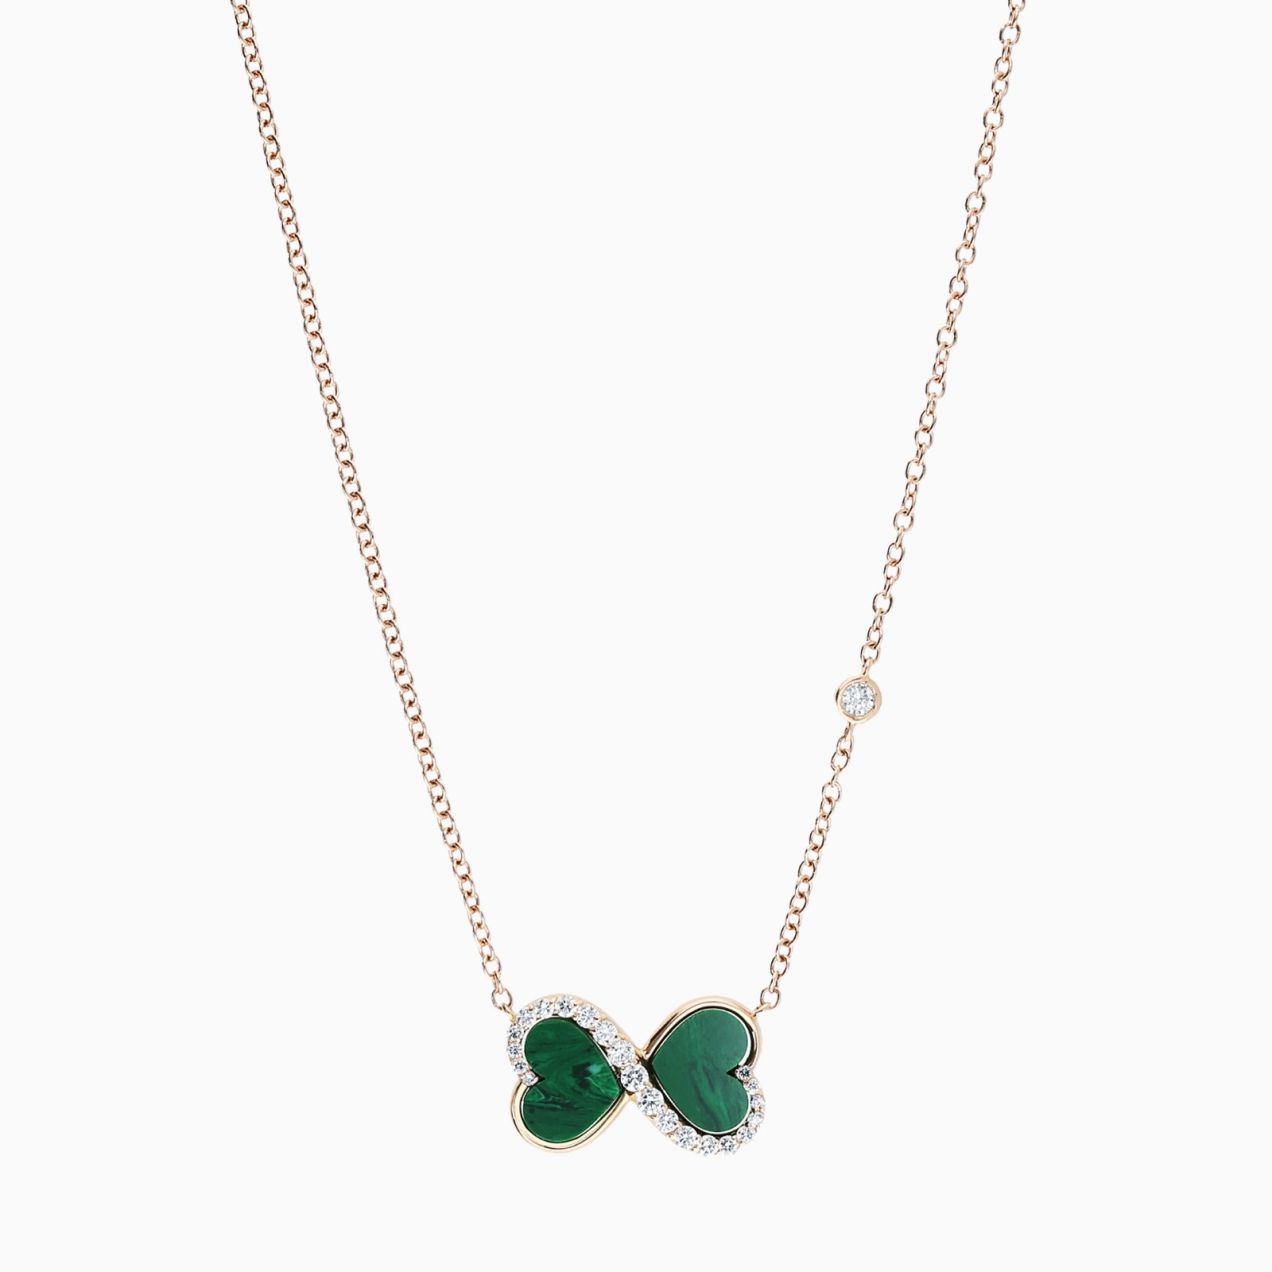 Infinity symbol pendant in rose gold with heart-cut malachite and diamonds